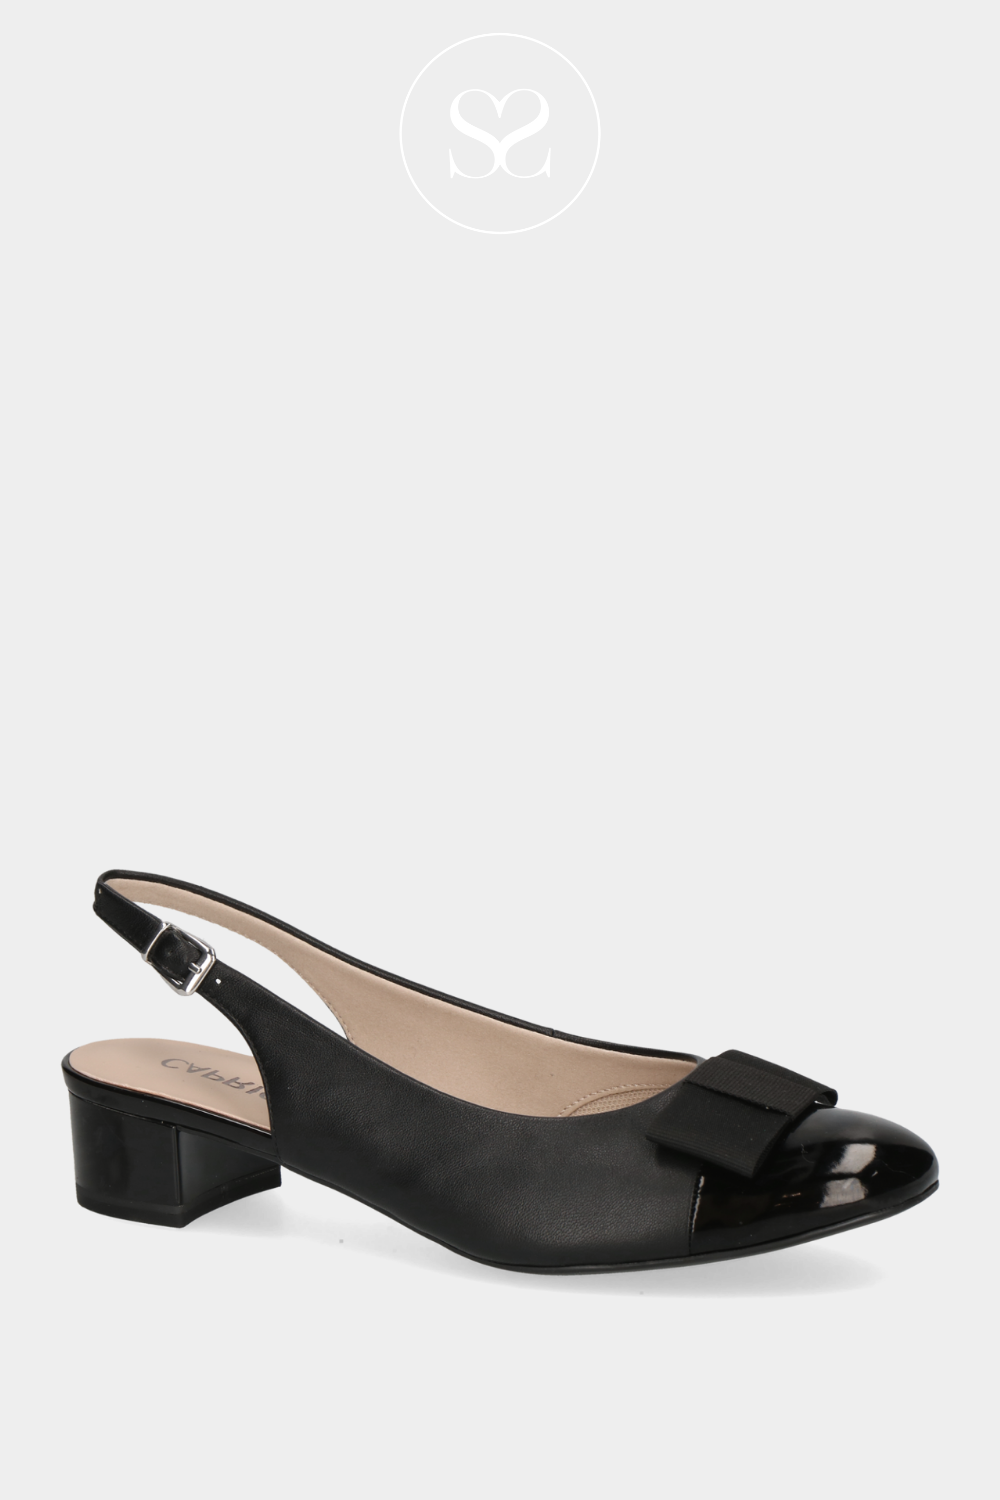 CAPRICE 9-29502-42 BLACK HEELED PUMP WITH ADJUSTABLE SLINGBACK STRAP AND BLACK BOW TO THE FRONT